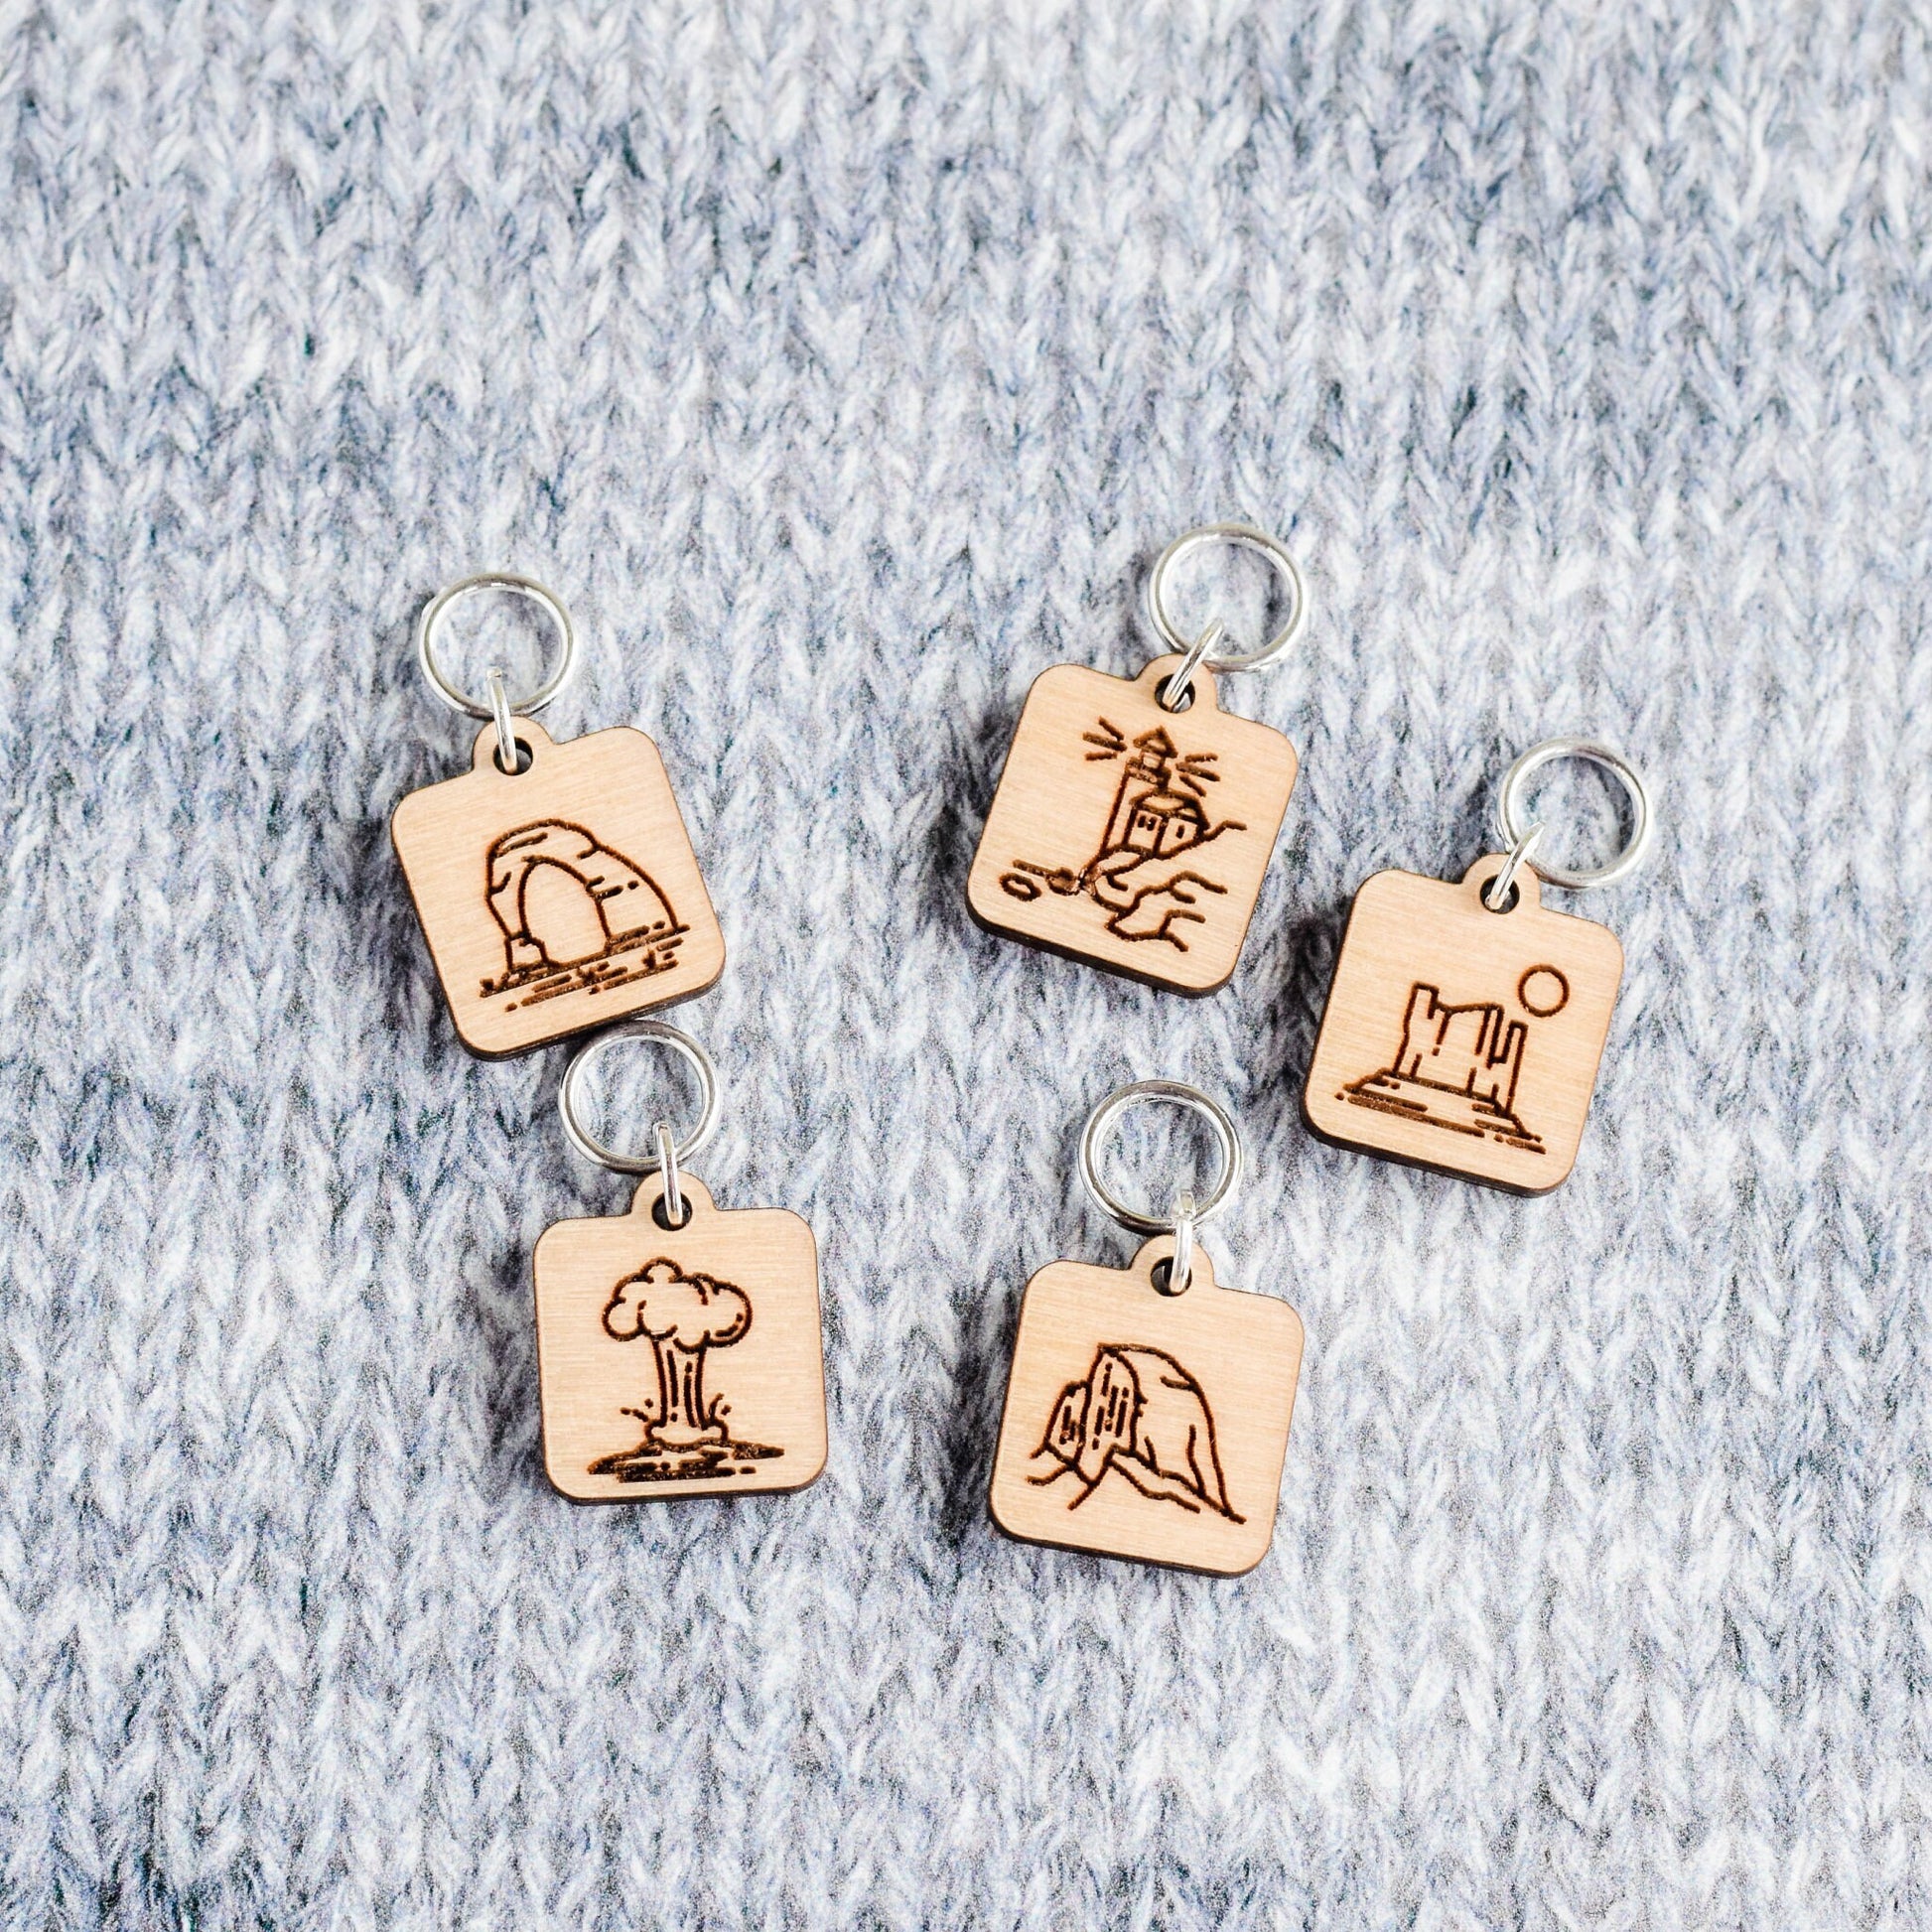 Set of 5 Stitch Markers, National Parks, Laser Engraved Wood Stitch Markers, Yellowstone, America, Lighthouse